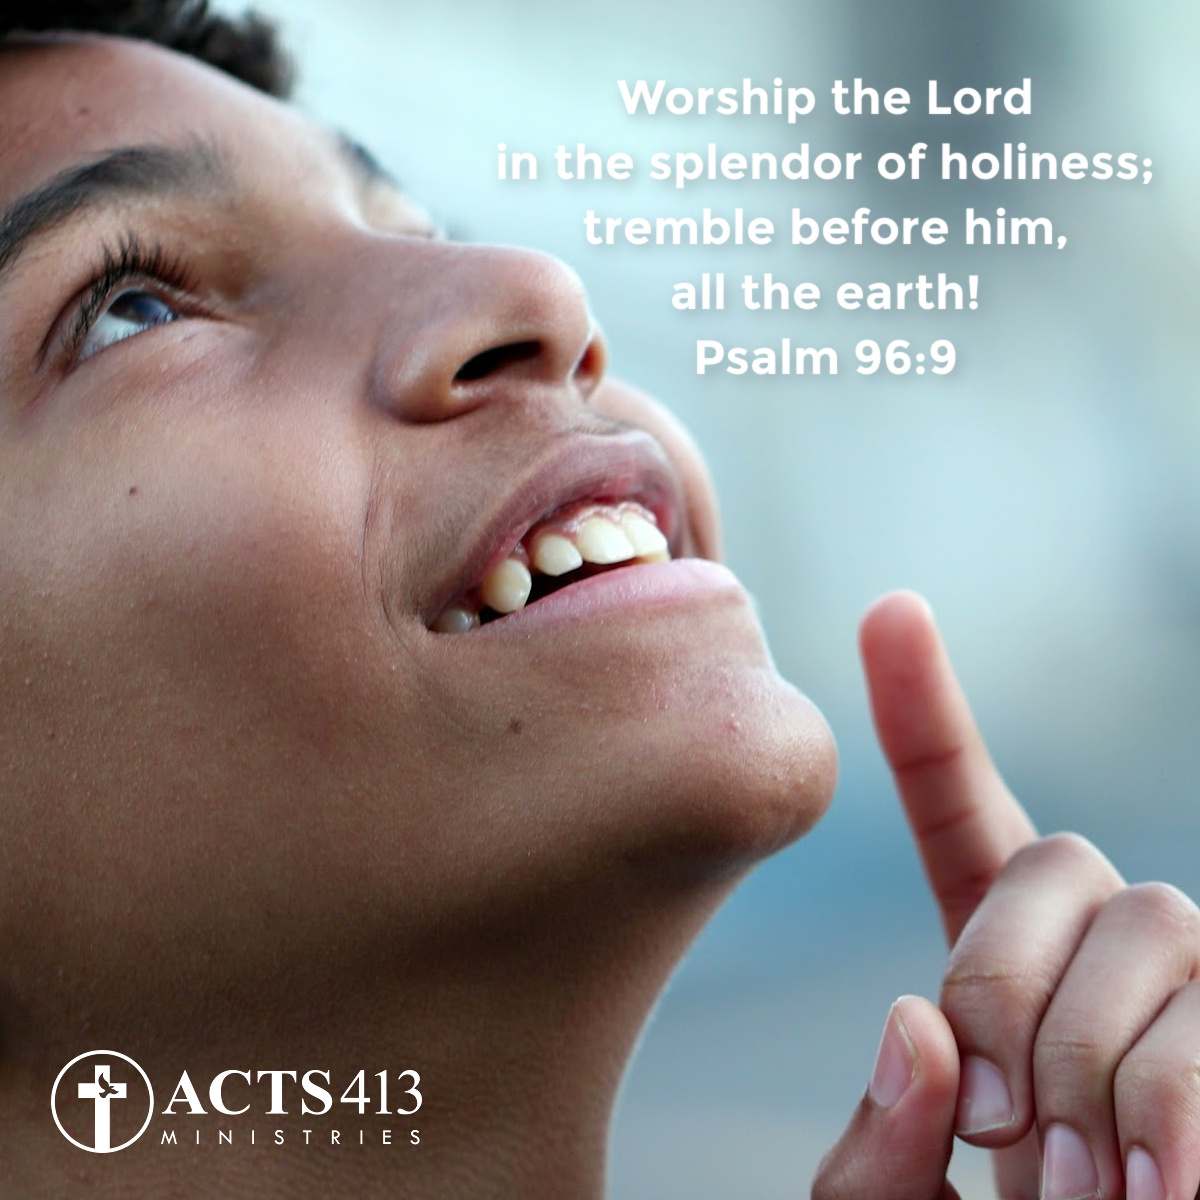 'Worship the Lord in the splendor of holiness; tremble before him, all the earth!' Psalm 96:9
#Worship #LordsDay #Psalms #PrayingScripture